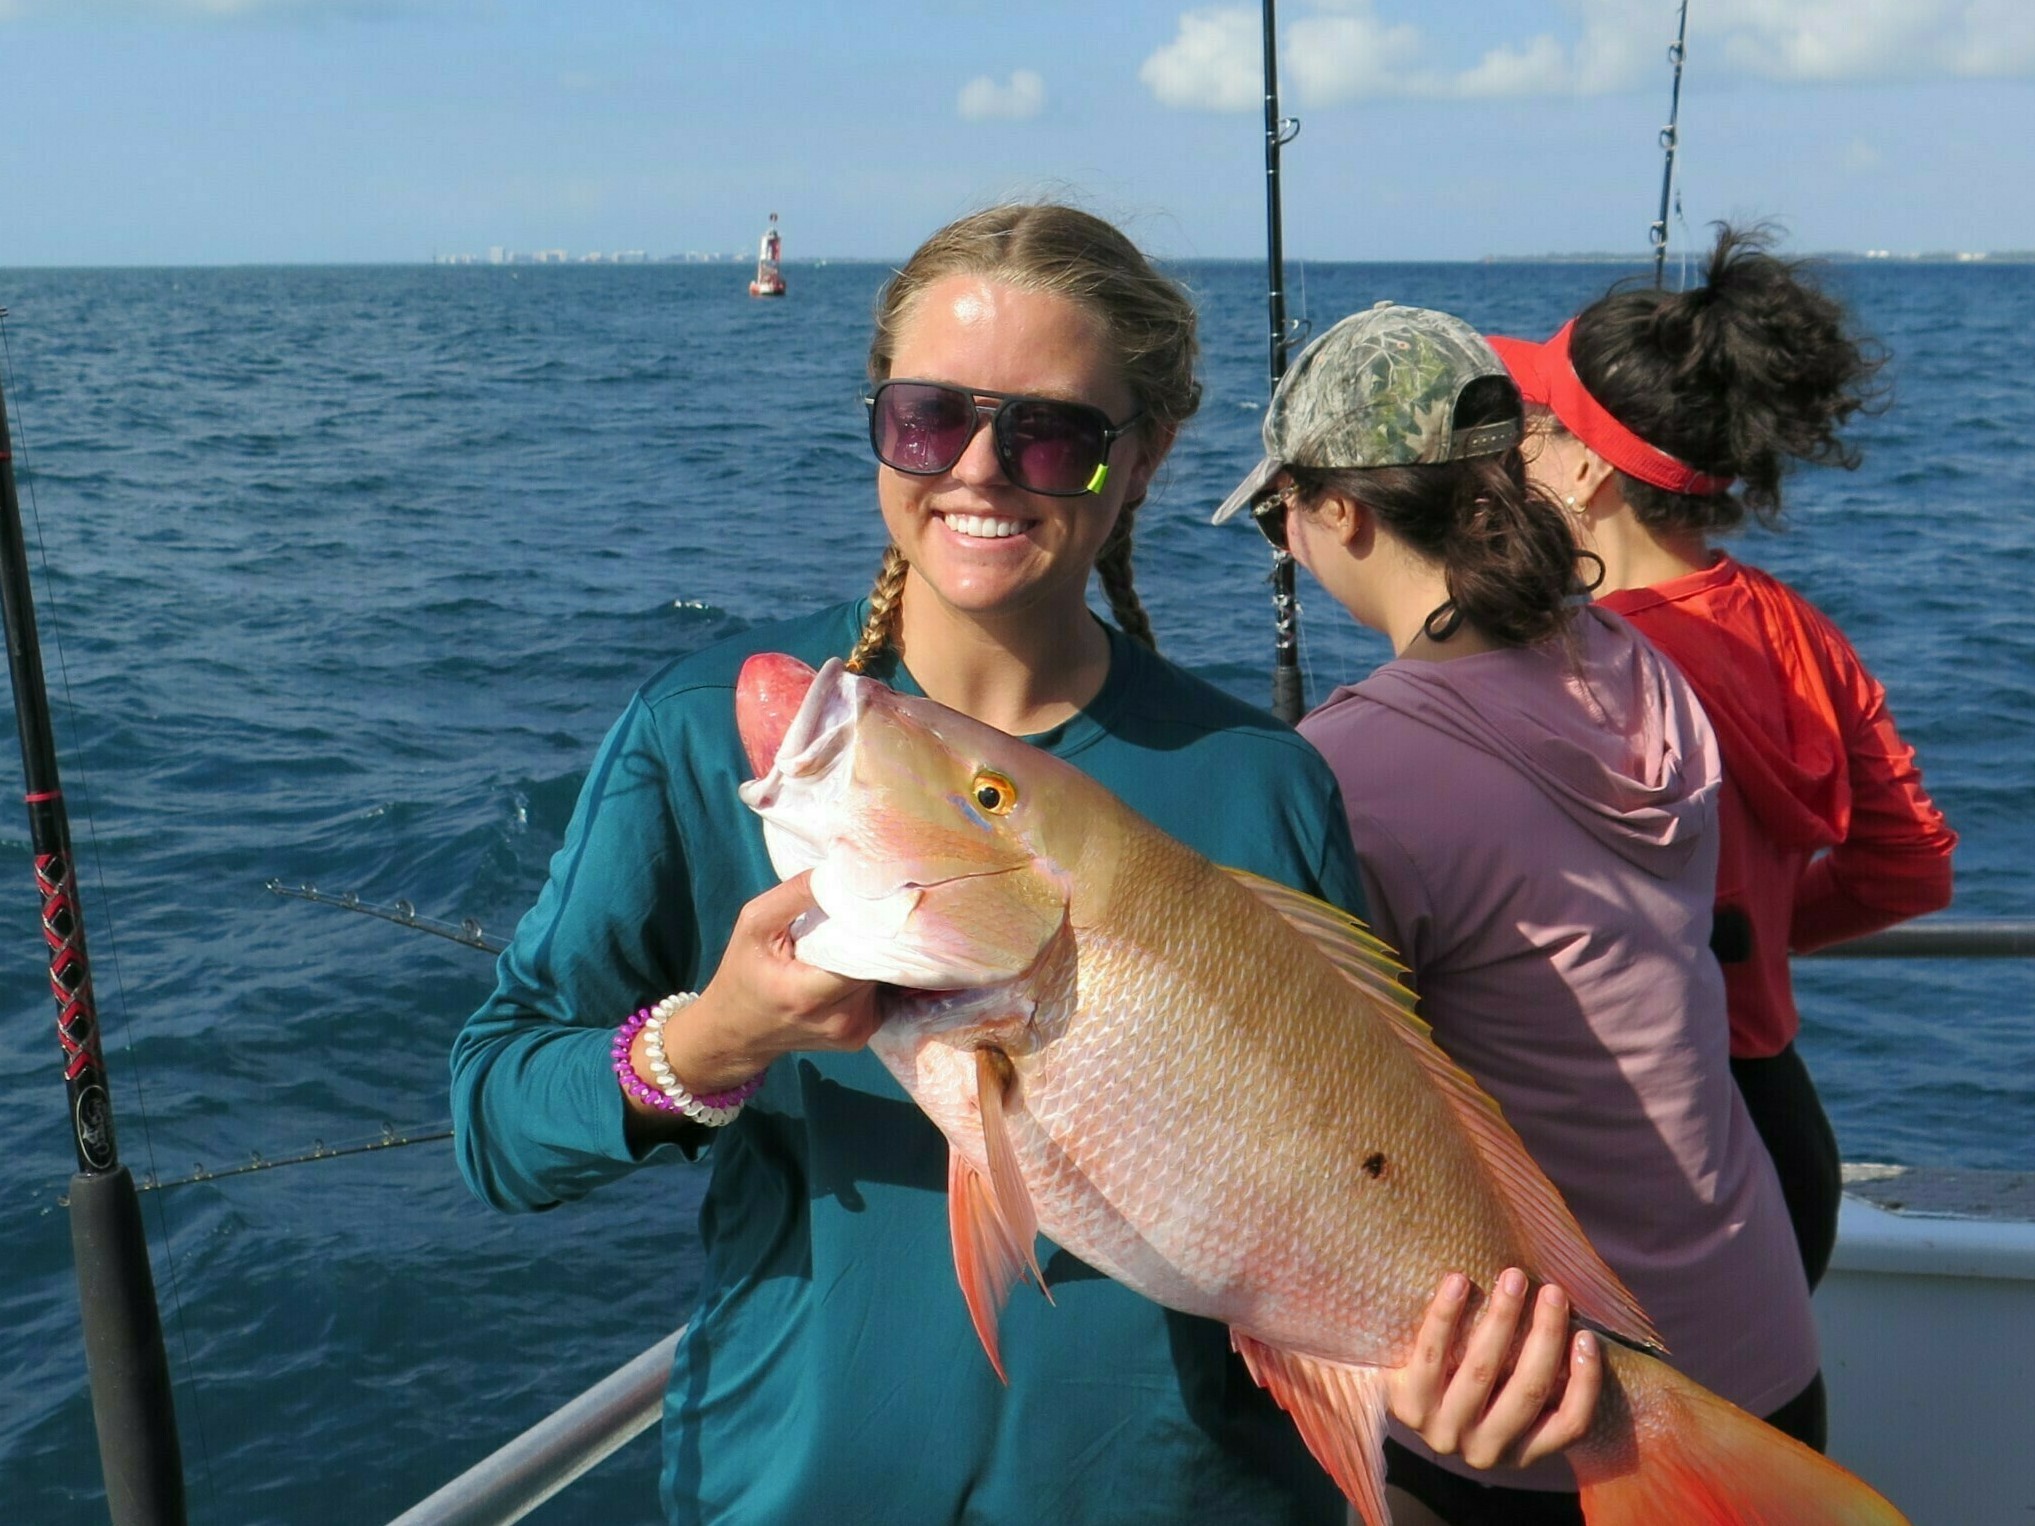 University of Miami Marine Sciences student Lauren Hayes with her catch, a 7 or 8 pound mutton snapper, which was released and returned to its reef habitat more than 100 feet below the surface.